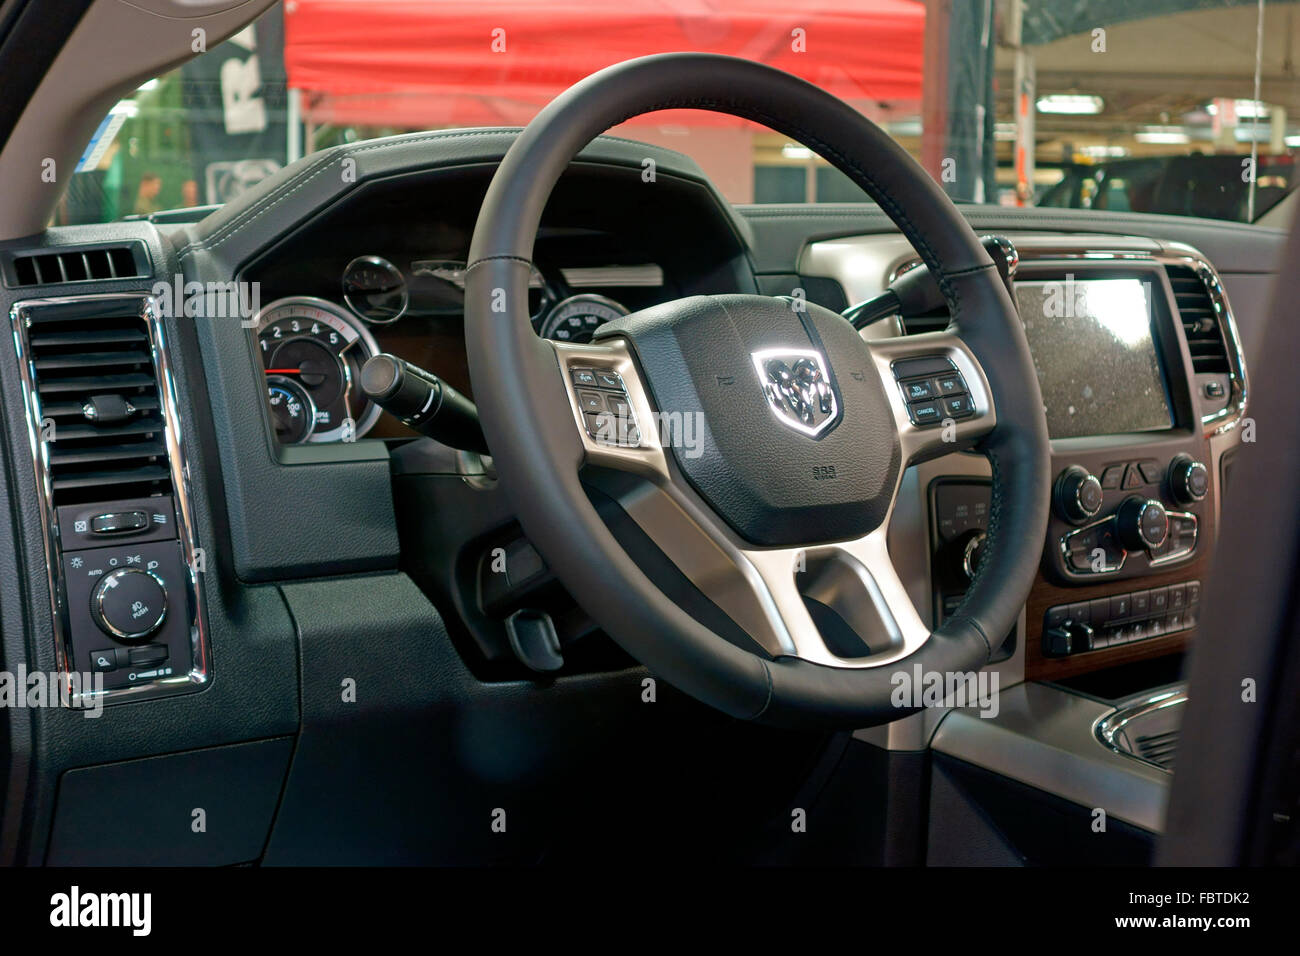 The steering wheel and dash of a 2015 or 16 Dodge Ram truck Stock Photo